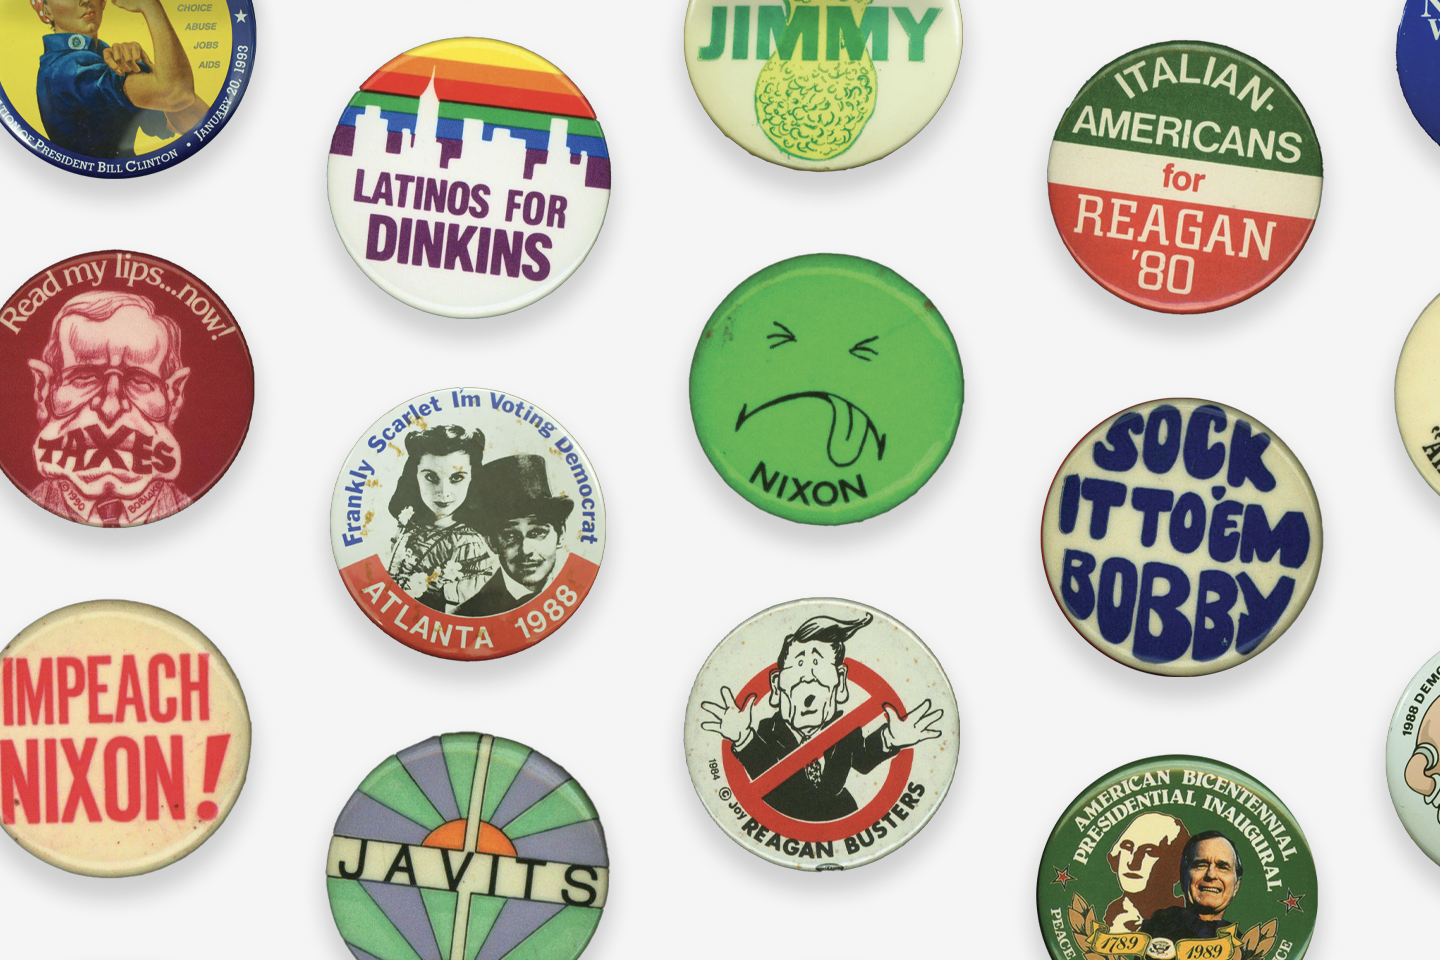 A collage of buttons showing significant artifacts, sayings and pop culture from the 1980s